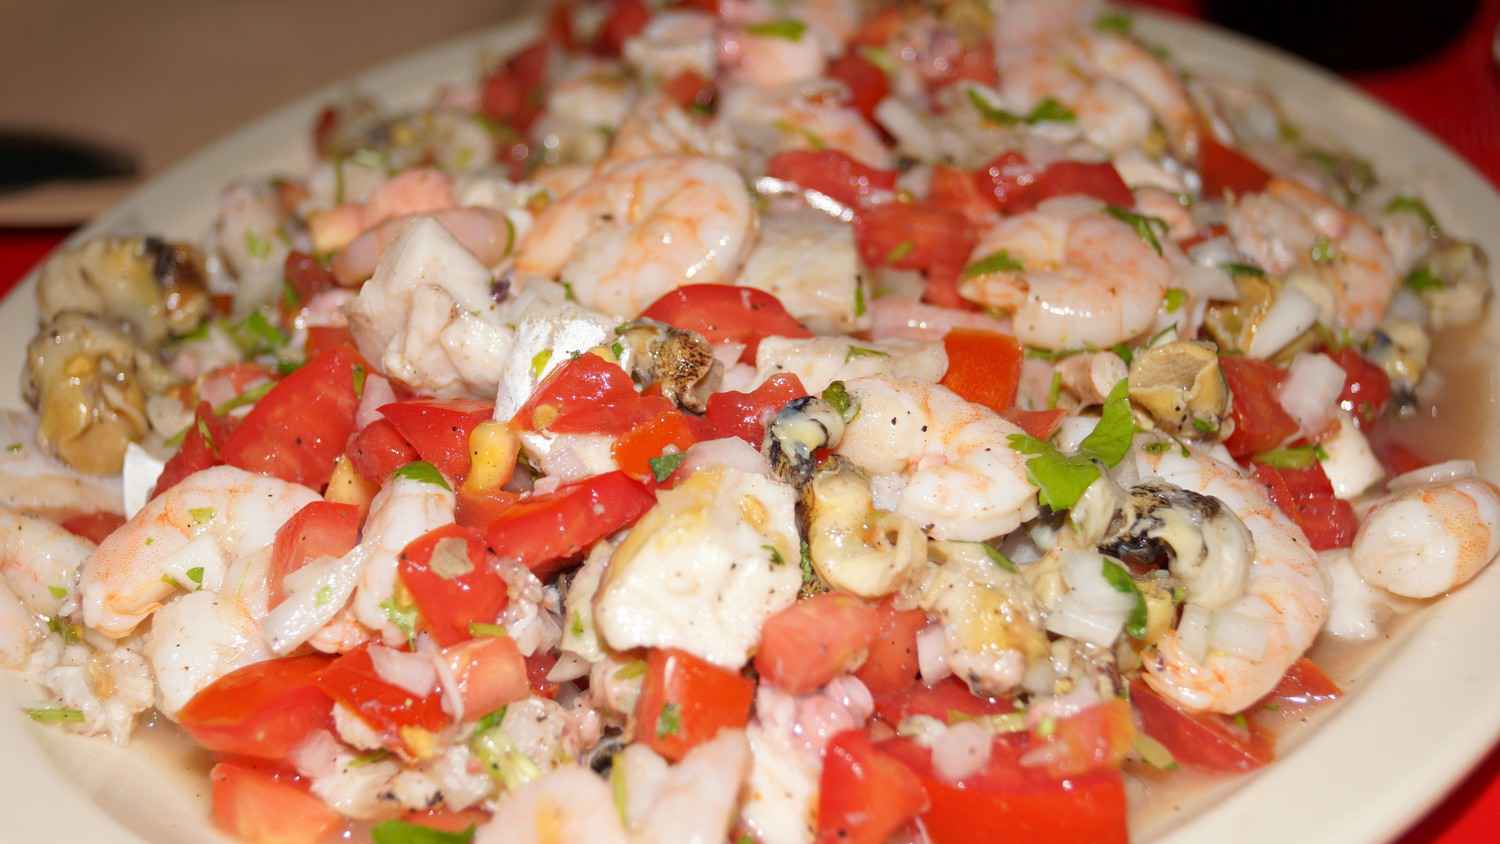 A plate chock full of delicious shrimp ceviche.